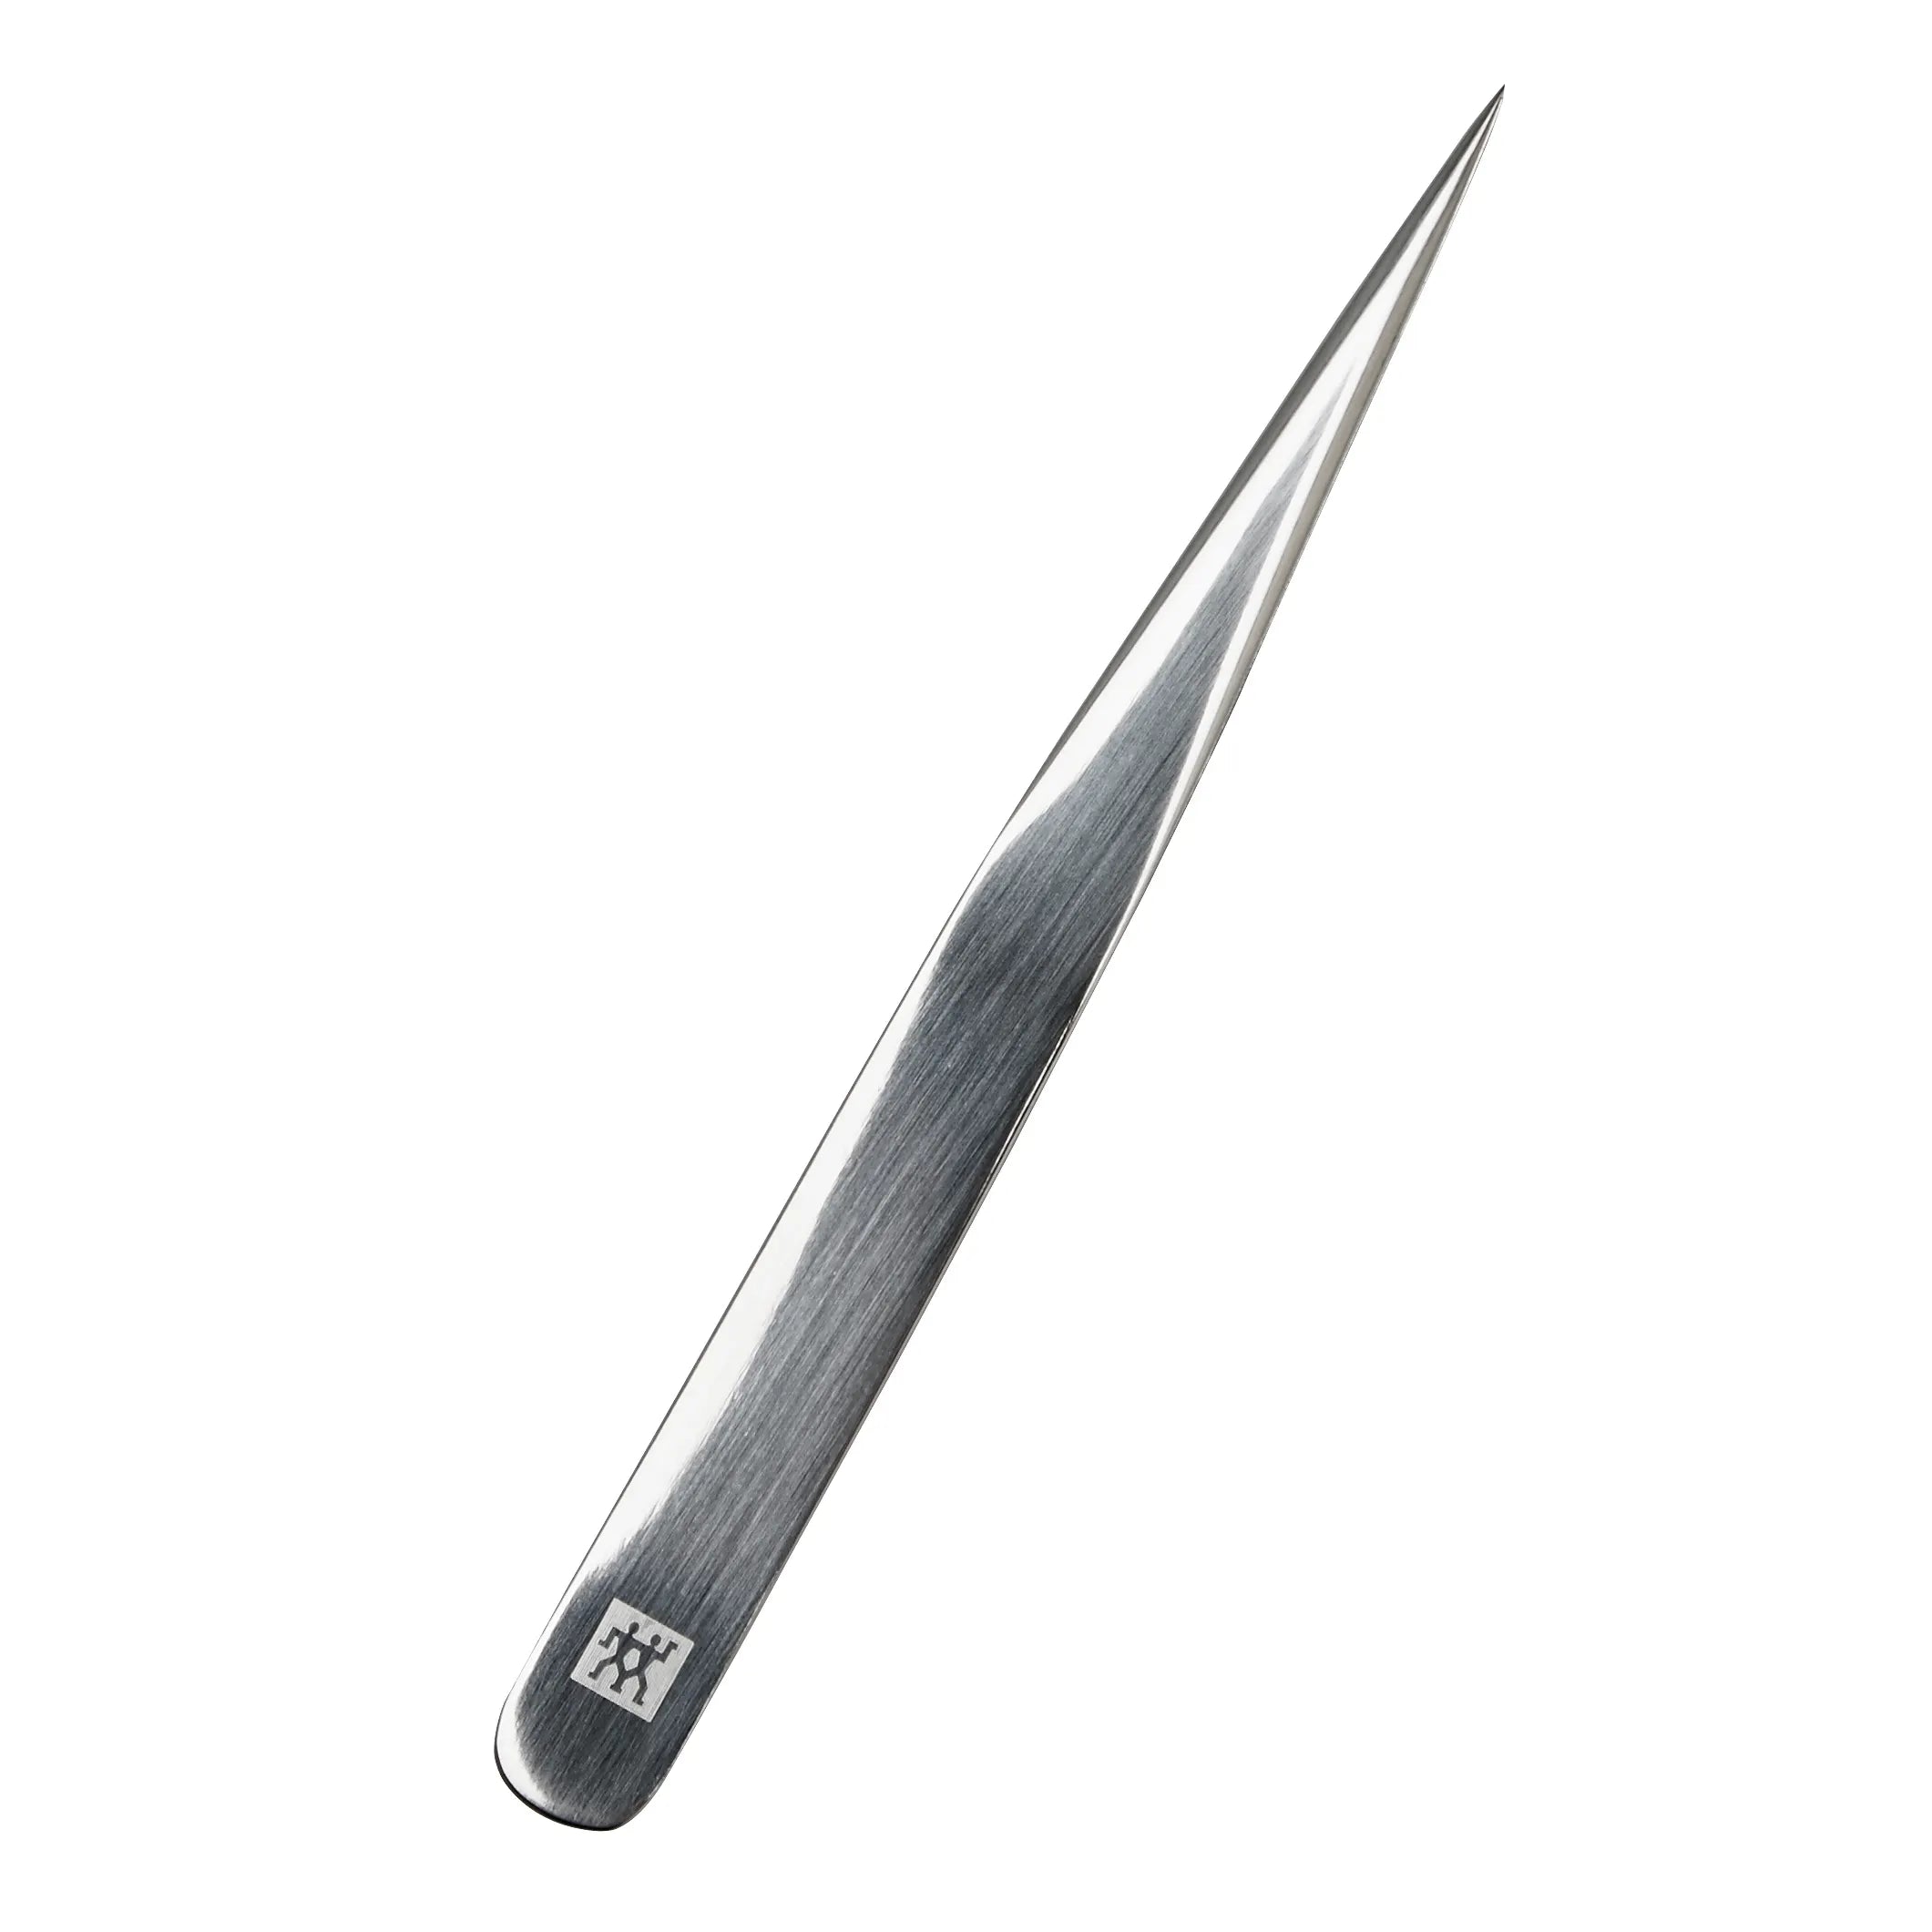 Zwilling Classic Inox tweezers pointed 9 cm - polished silver